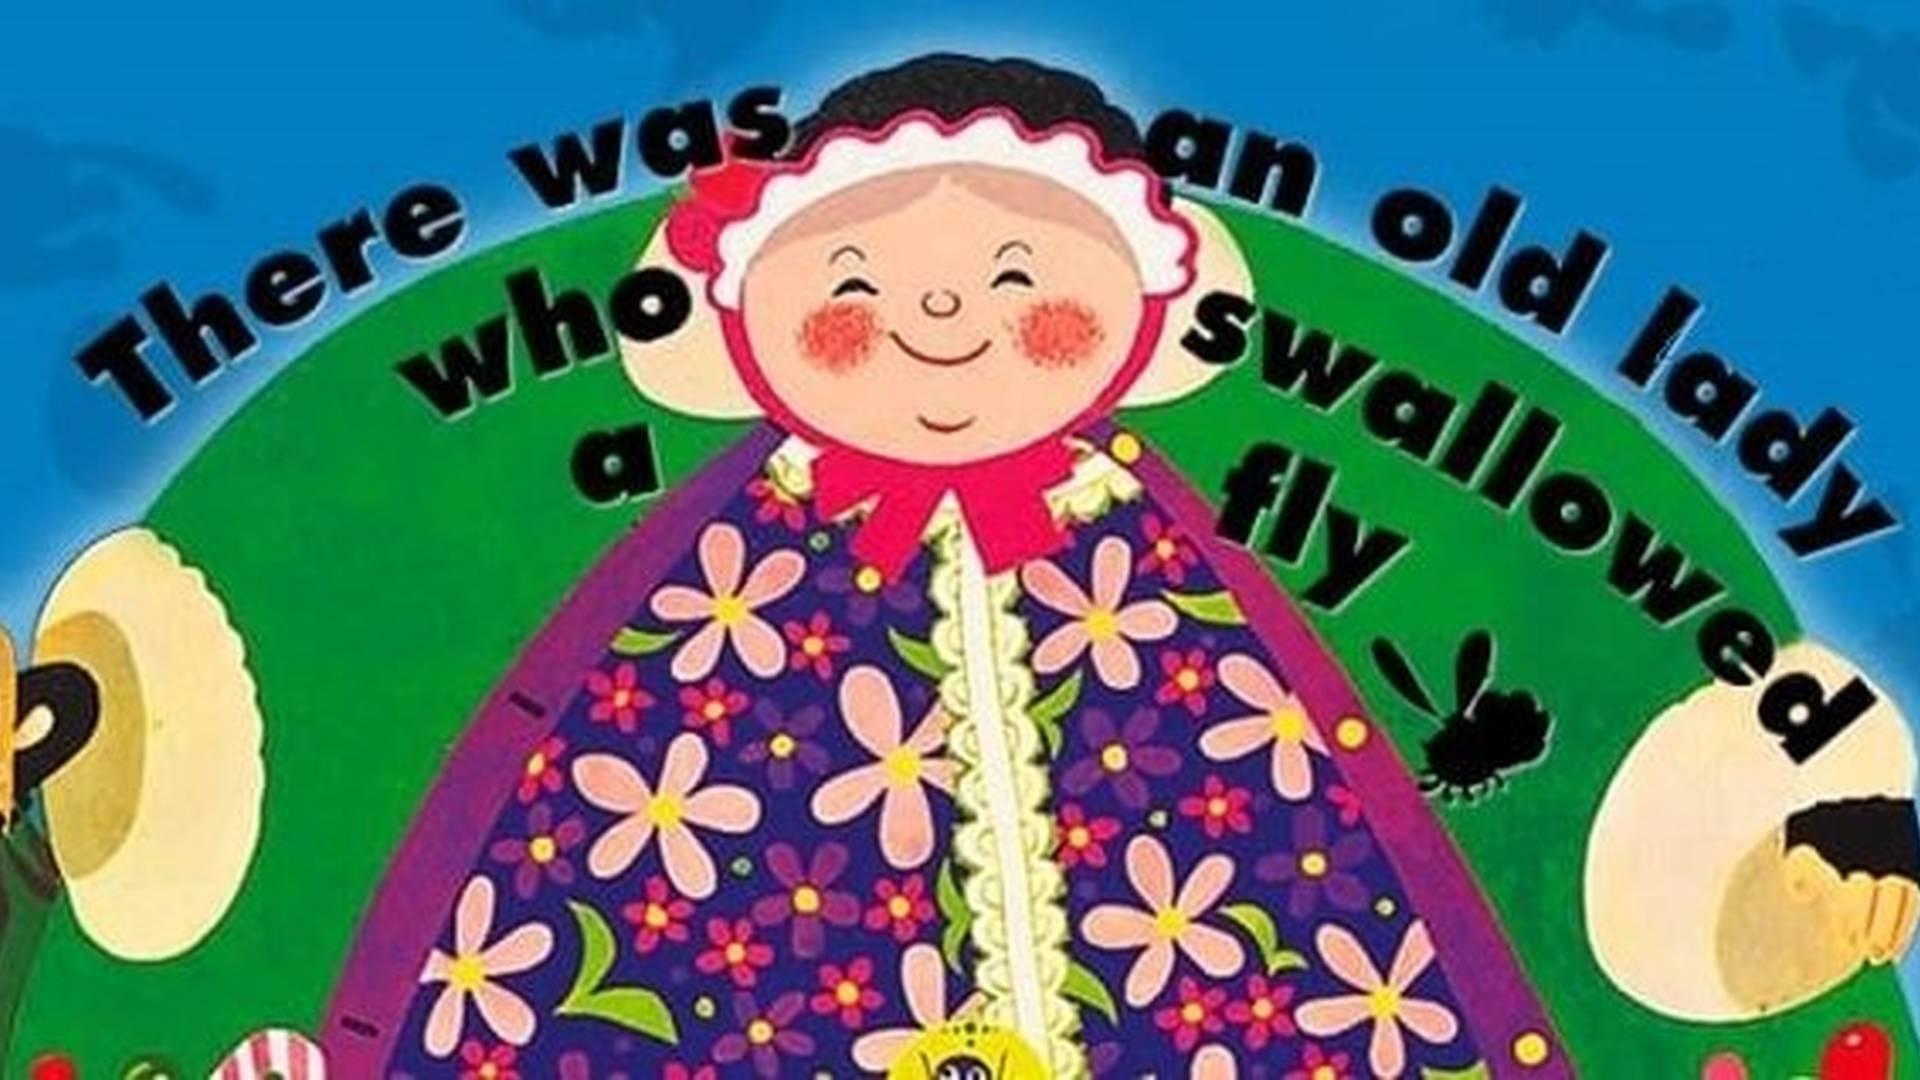 There Was An Old Lady Who Swallowed A Fly photo